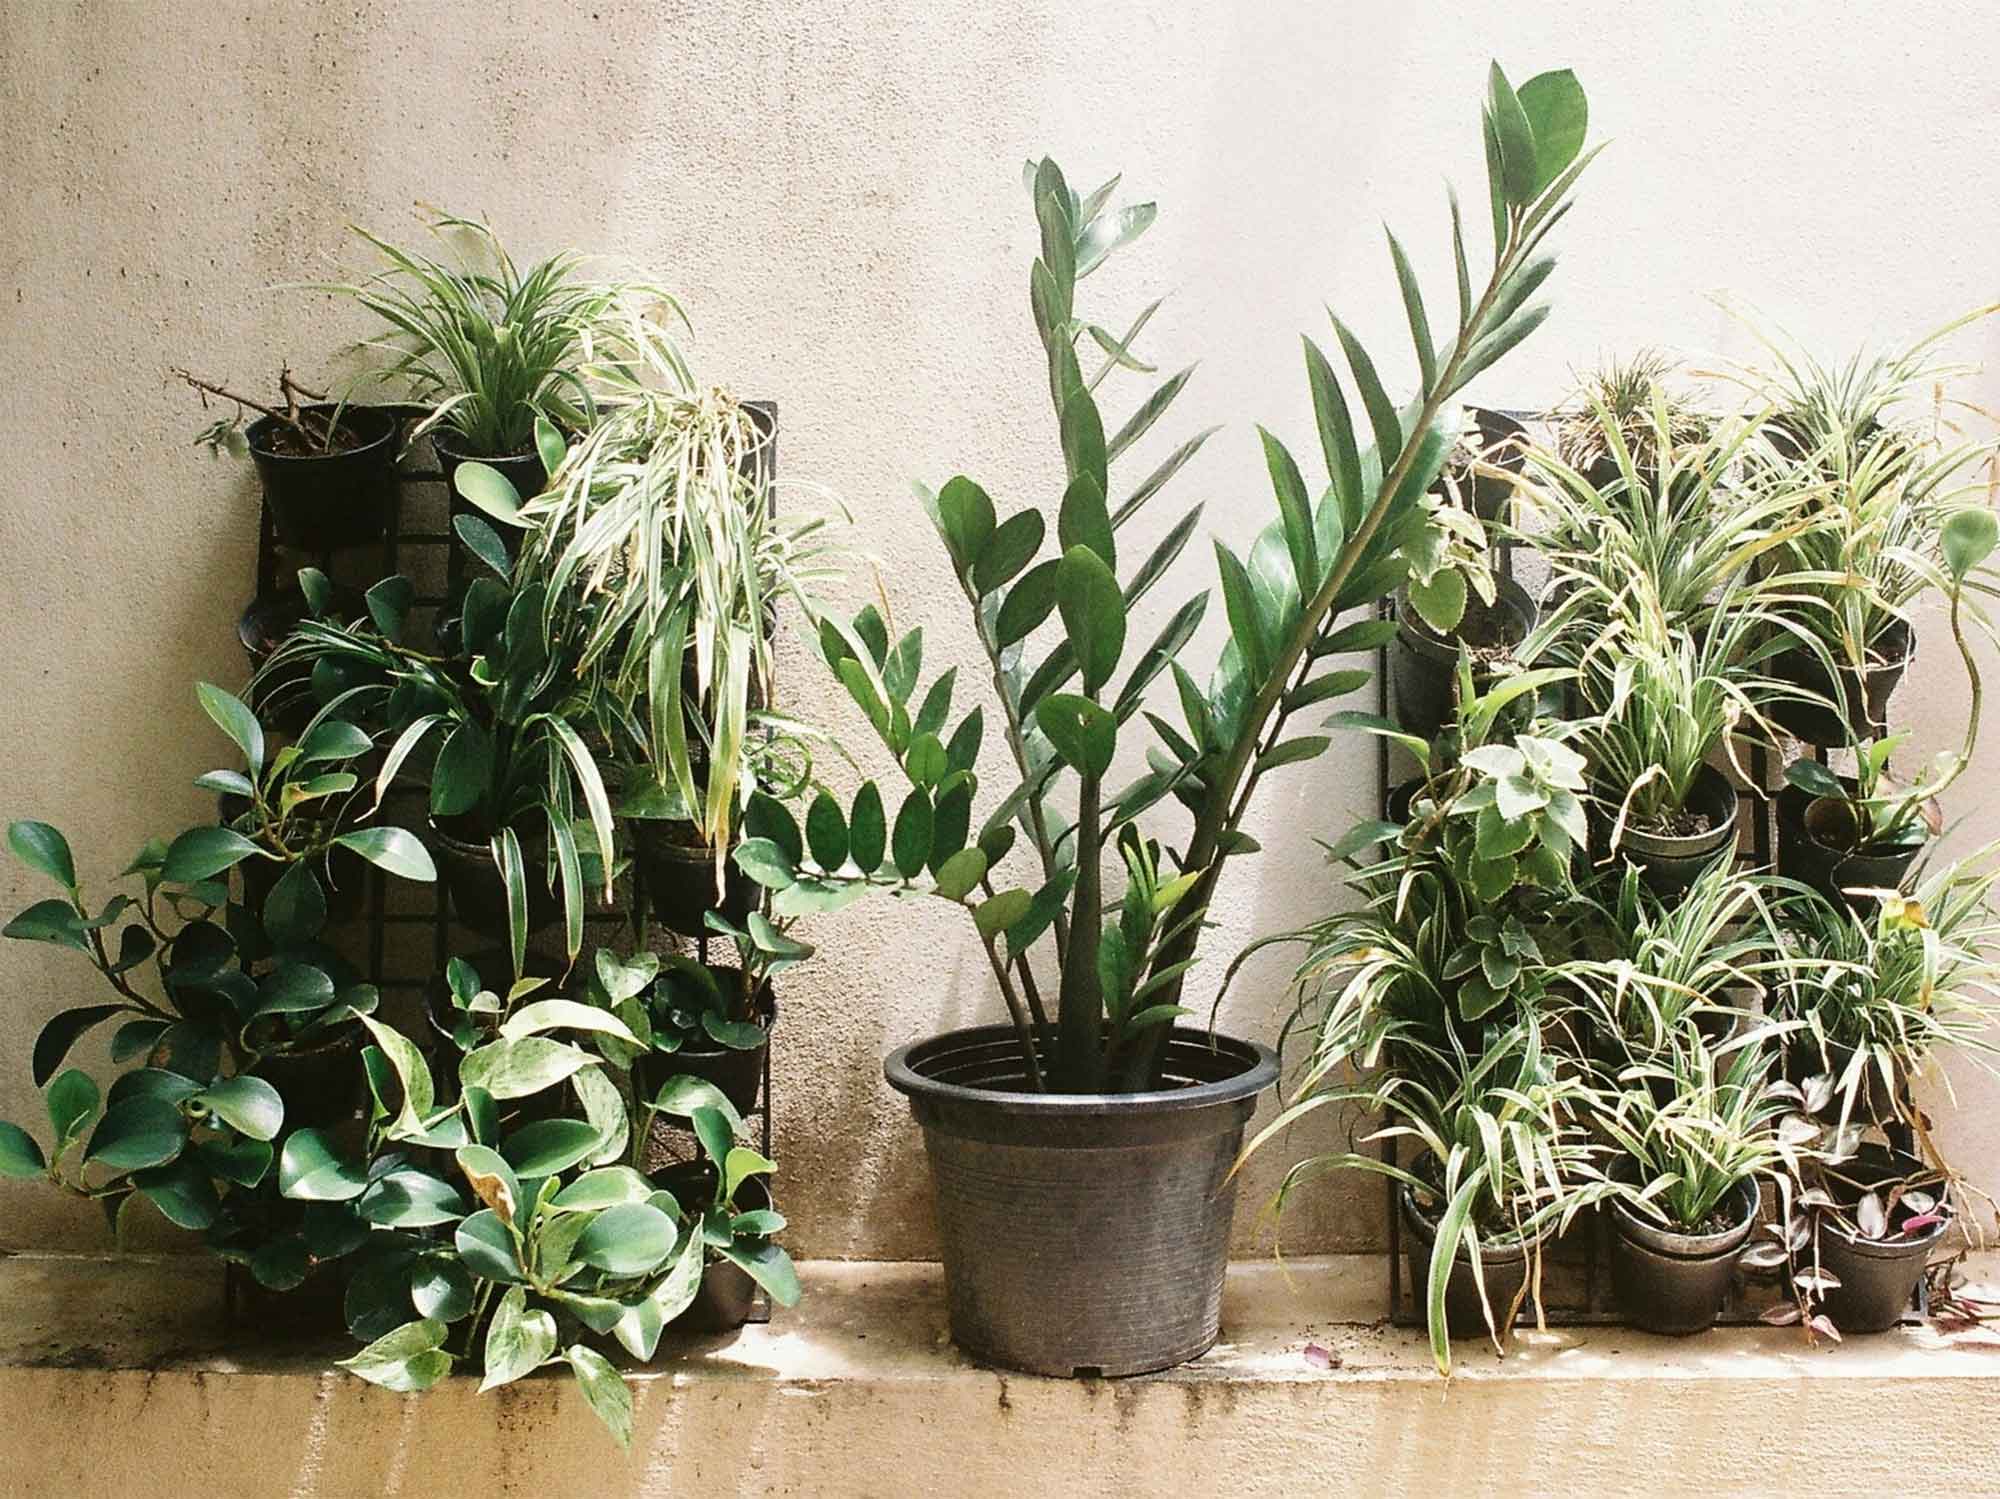 5 of The Coolest Tiny Plants for Tiny Spaces - realestate.com.au